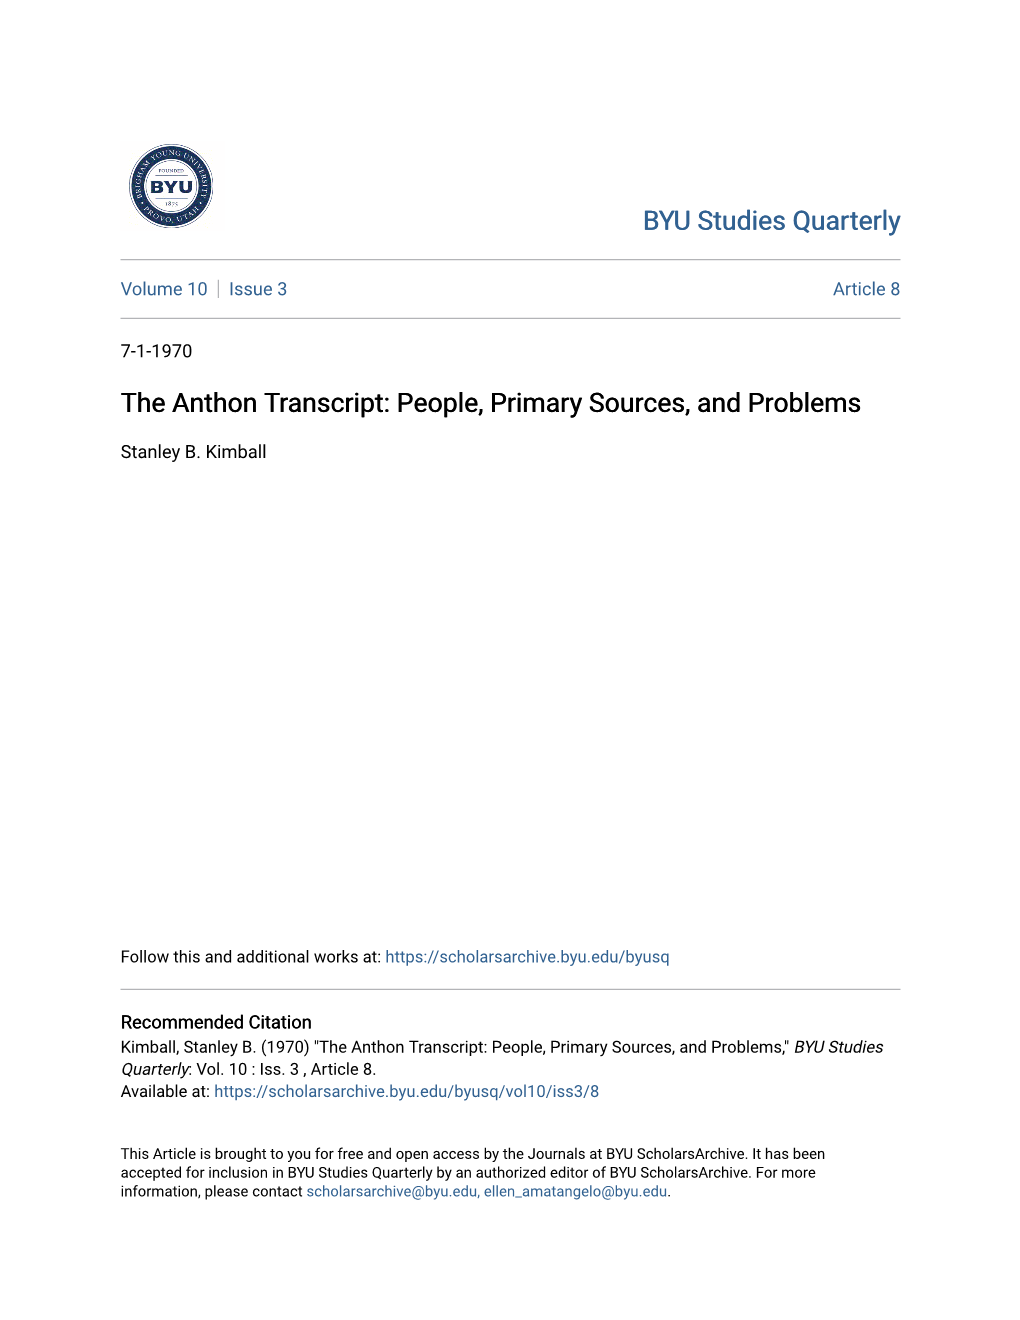 The Anthon Transcript: People, Primary Sources, and Problems